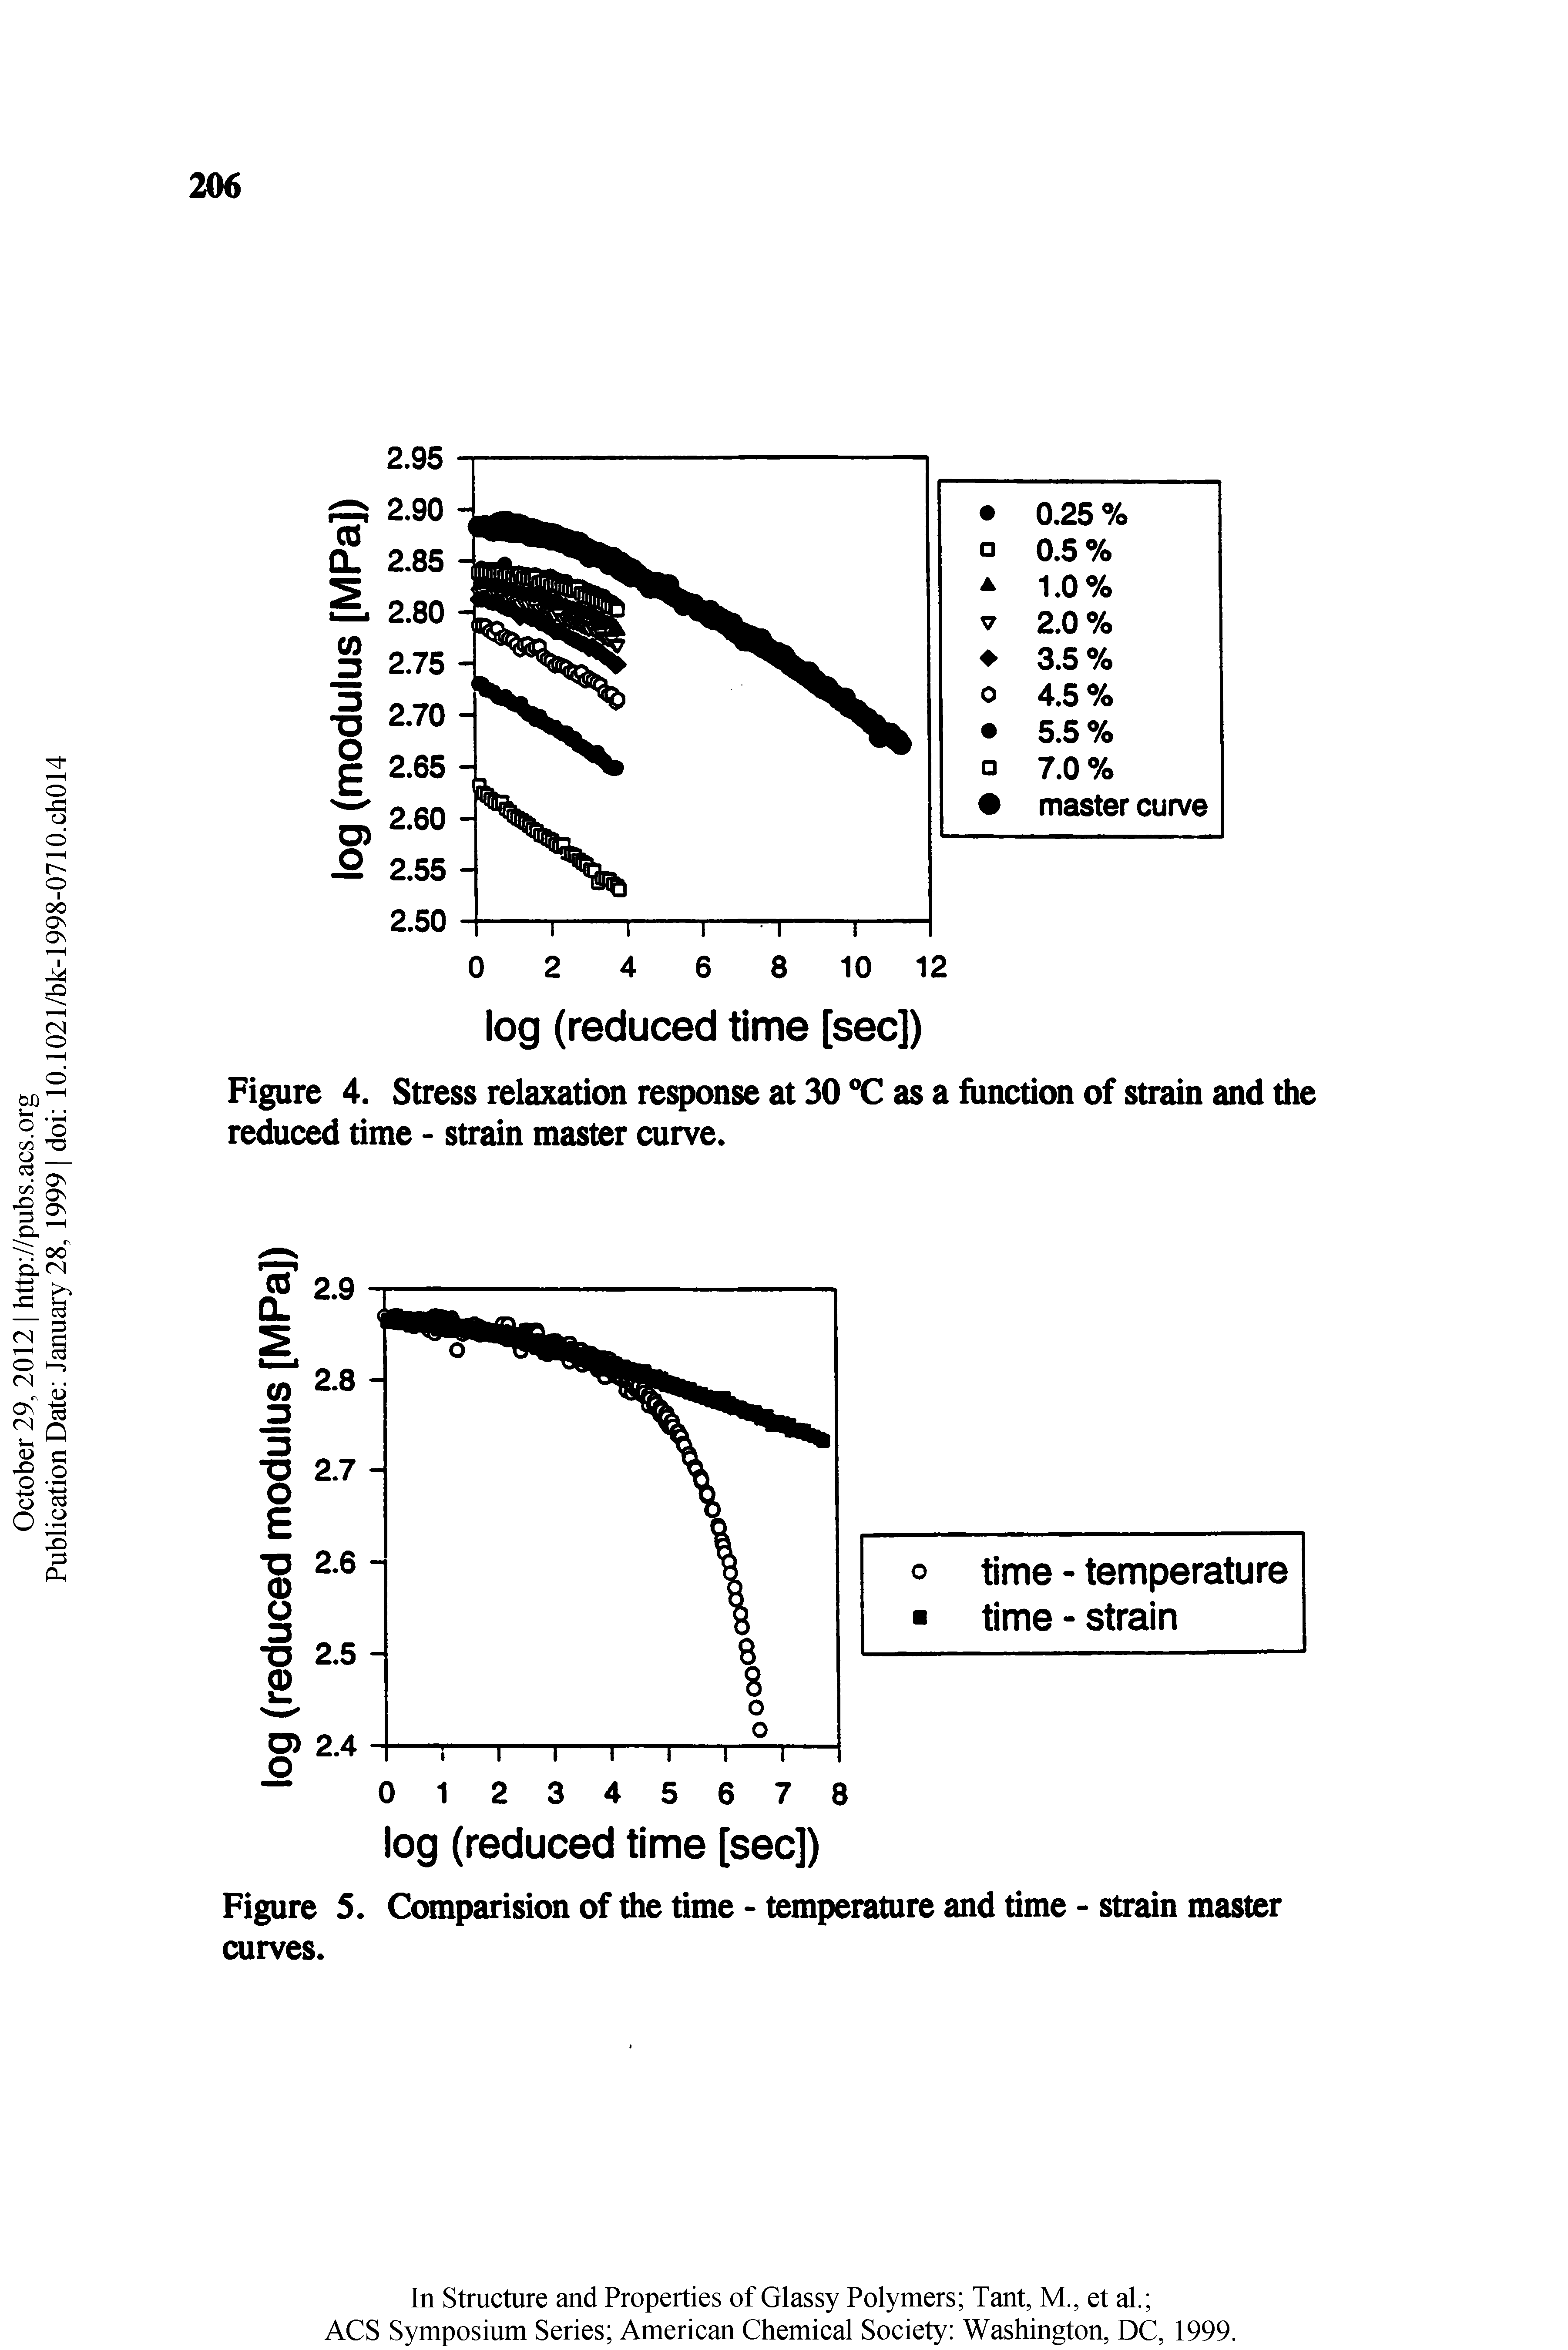 Figure S. Comparision of the time - temperature and time - strain master curves.